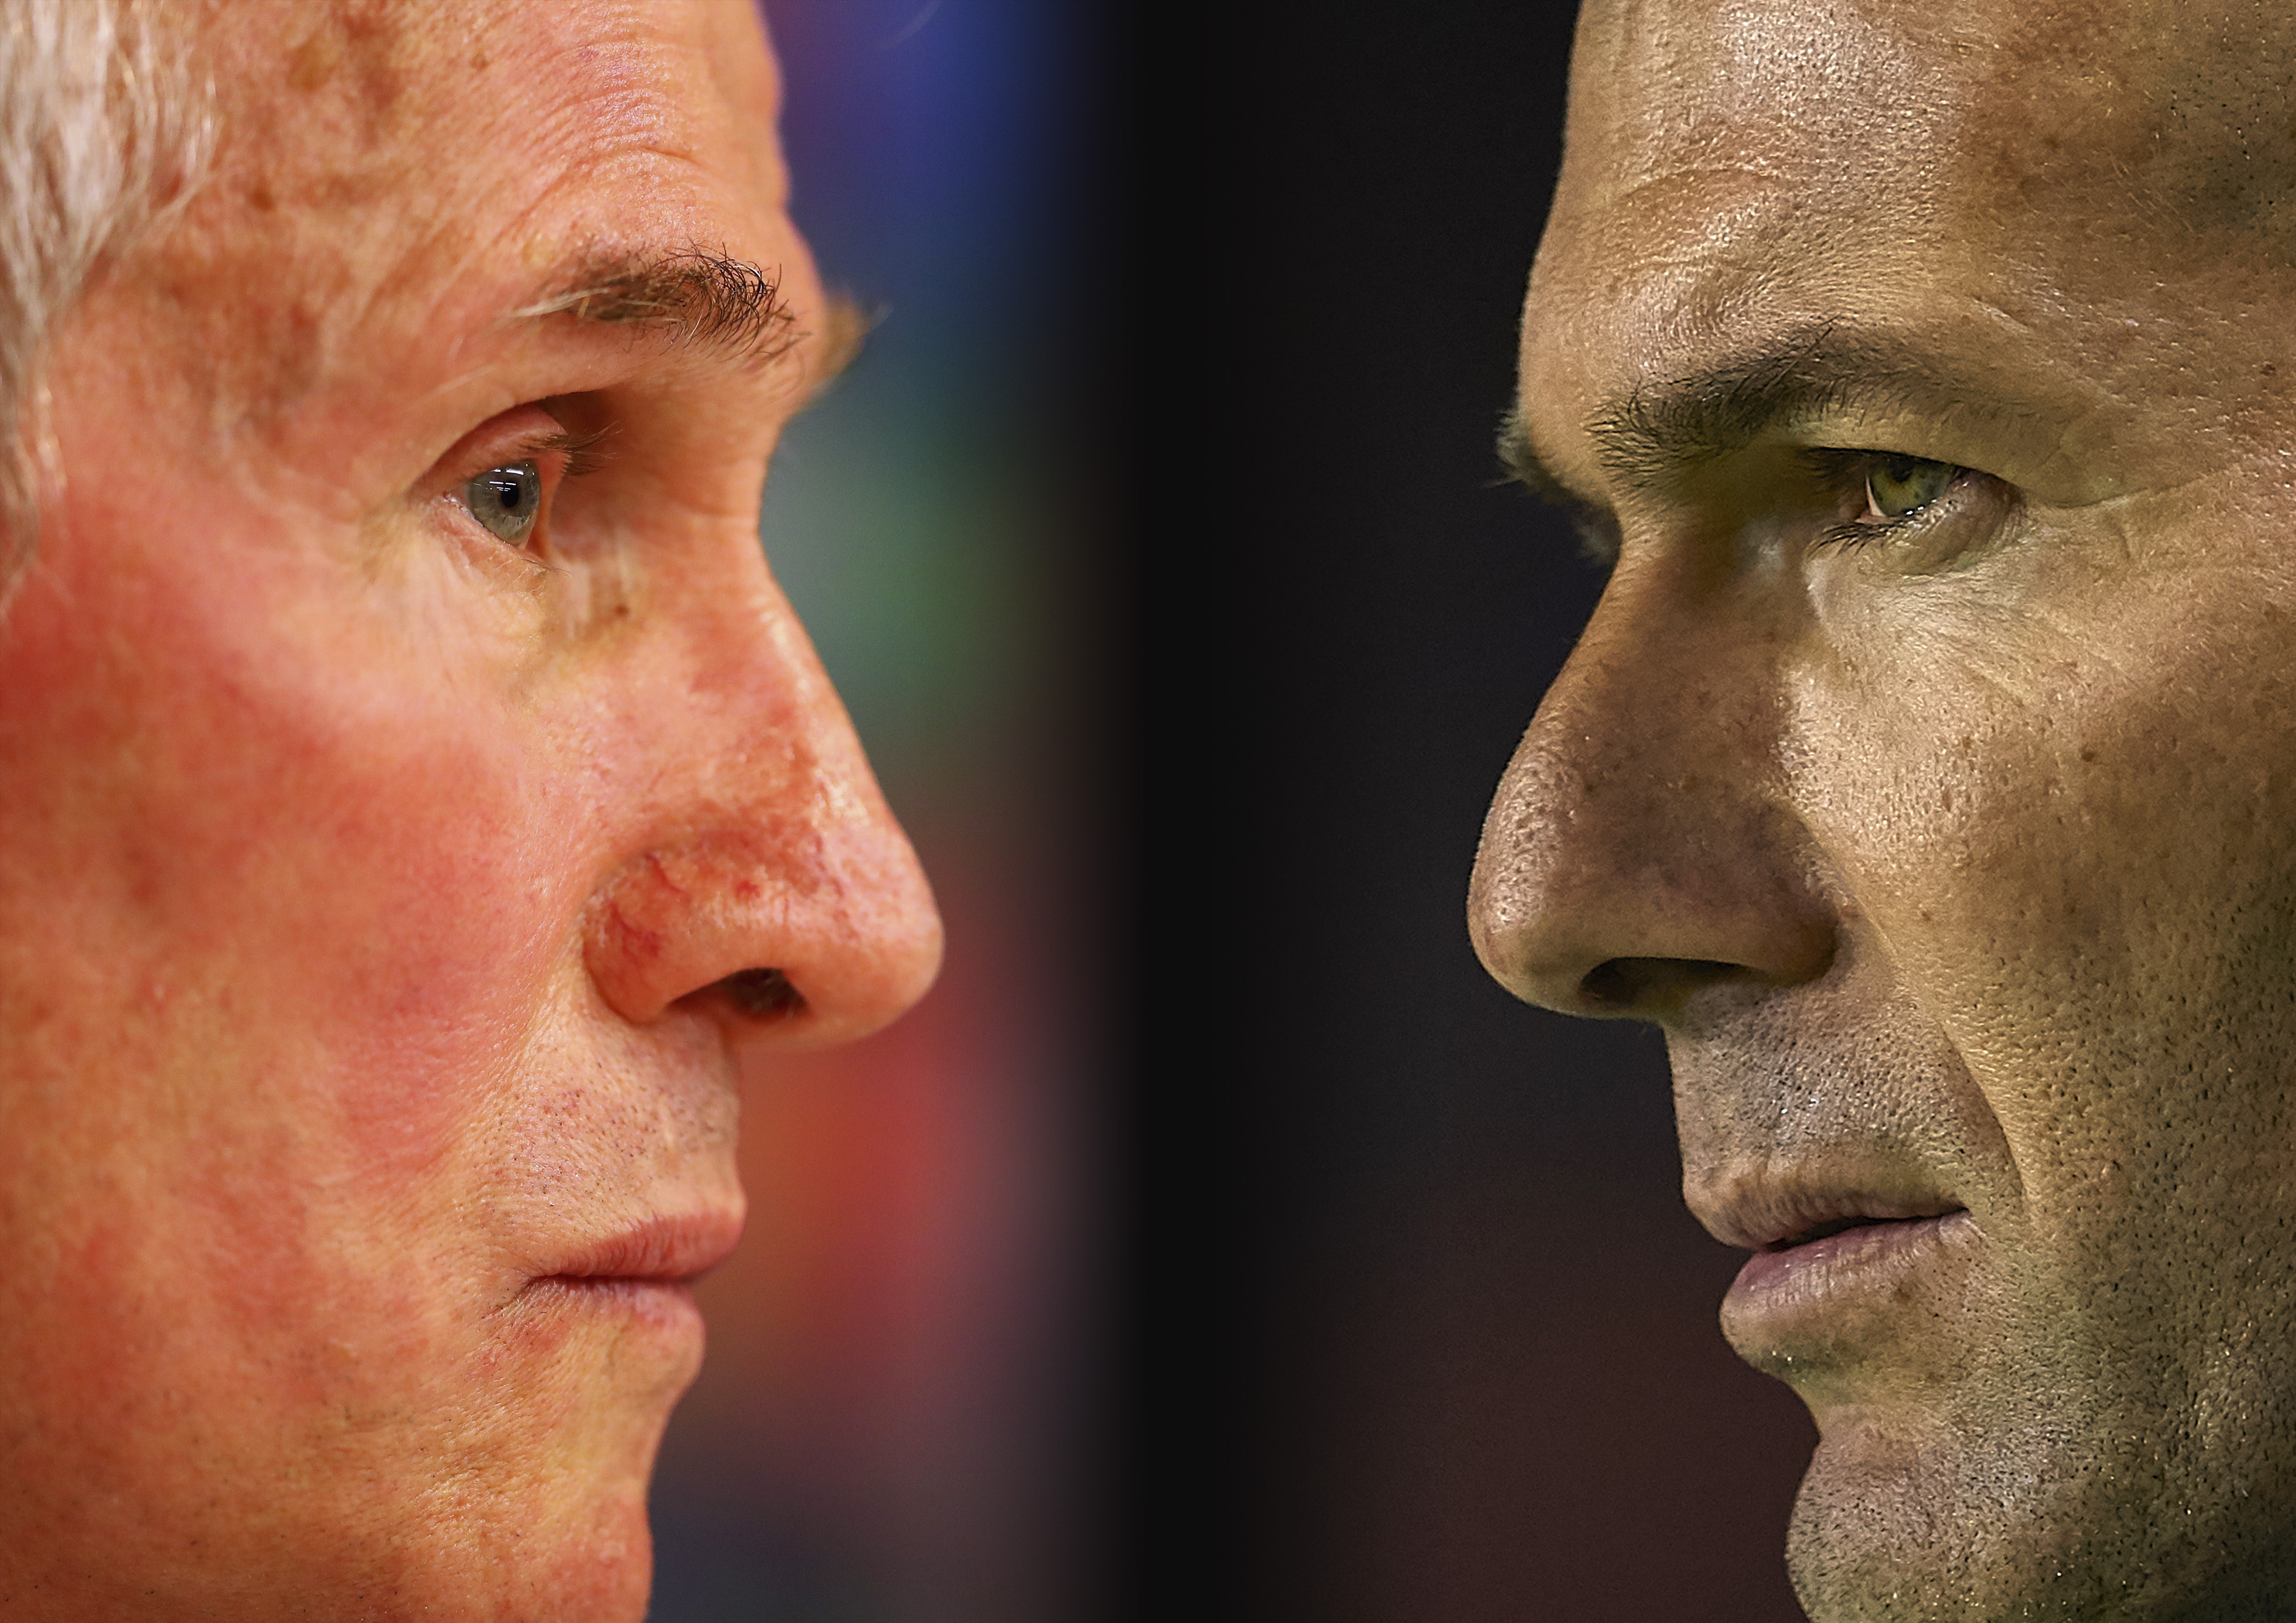 FILE PHOTO (EDITORS NOTE: GRADIENT ADDED - COMPOSITE OF TWO IMAGES - Image numbers (L) 877088496 and 913826124) In this composite image a comparison has been made between Bayern Munich Head Coach / Manager, Jupp Heynckes (L) and Zinedine Zidane, Manager of Real Madrid. Bayern Muenchen and Real Madrid meet in a  UEFA Champions League Semi Final, over two legs.    ***LEFT IMAGE*** BRUSSELS, BELGIUM - NOVEMBER 21: Bayern Munich Head Coach / Manager, Jupp Heynckes speaks to the media during the Press Conference held at the Constant Vanden Stock Stadium on November 21, 2017 in Brussels, Belgium. R.S.C. Anderlecht will play Bayern Munich in their Group B, Champions League match on the 22nd of November, 2017. (Photo by Dean Mouhtaropoulos/Getty Images) ***RIGHT IMAGE*** VALENCIA, SPAIN - FEBRUARY 03: Zinedine Zidane, Manager of Real Madrid looks on prior to the La Liga match between Levante and Real Madrid at Ciutat de Valencia on February 3, 2018 in Valencia, Spain. (Photo by Manuel Queimadelos Alonso/Getty Images)